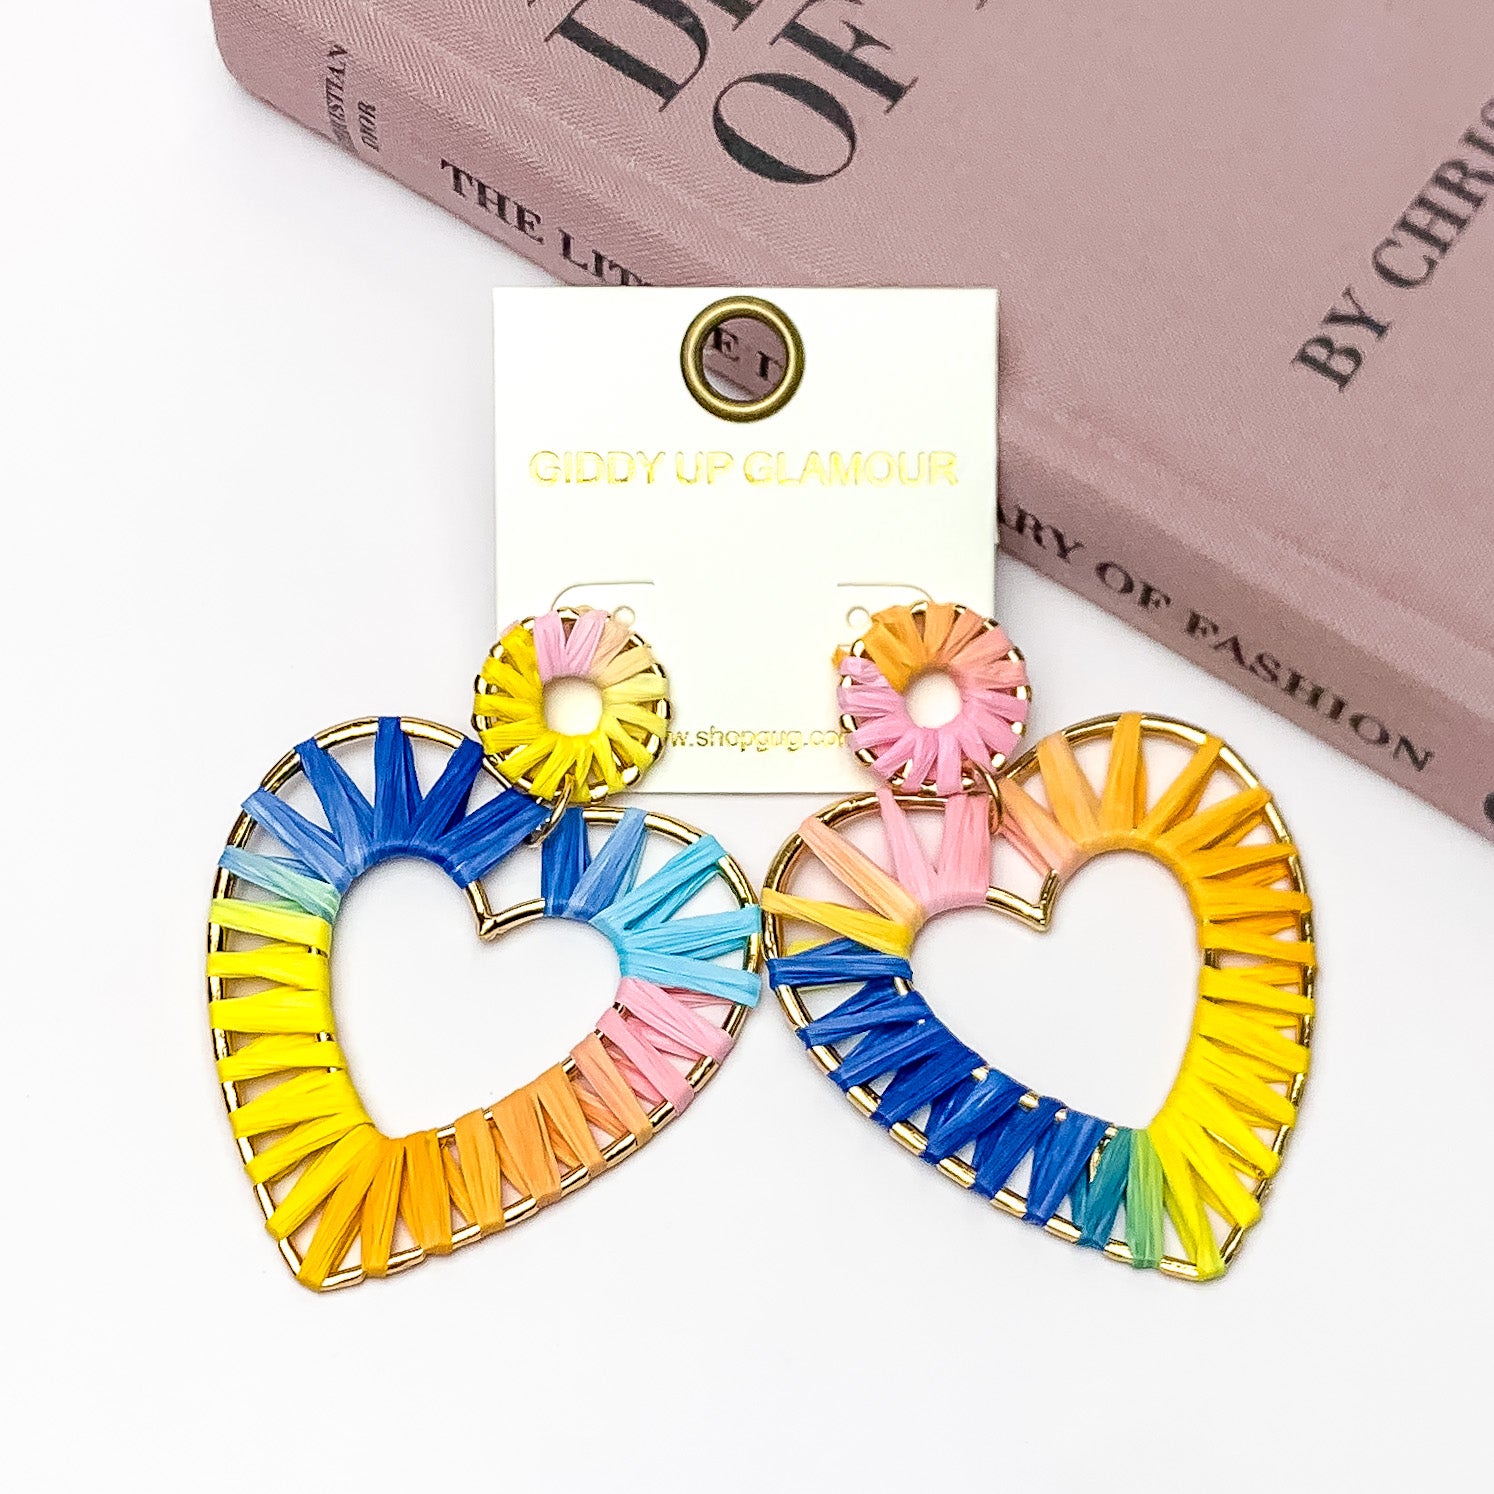 Rainbow Sunshine Open Heart Earrings in Multicolor. Pictured on a white background with the earrings laying against a pink book.